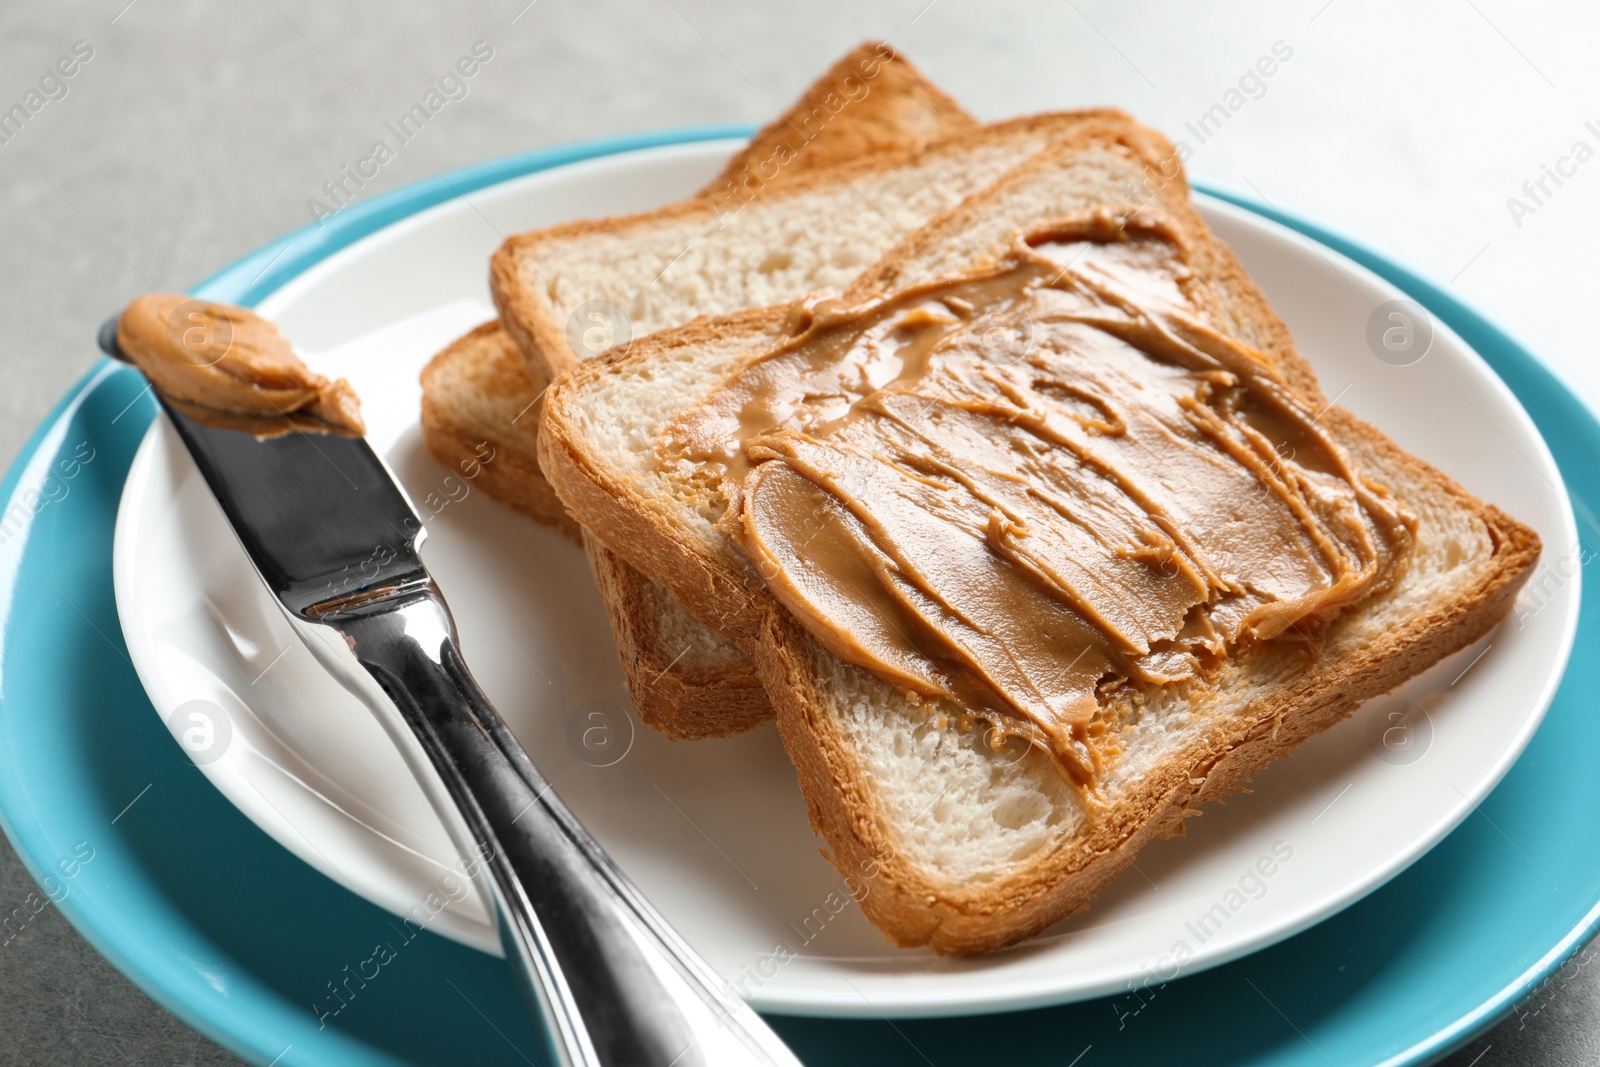 Photo of Plate with toast bread and peanut butter on table